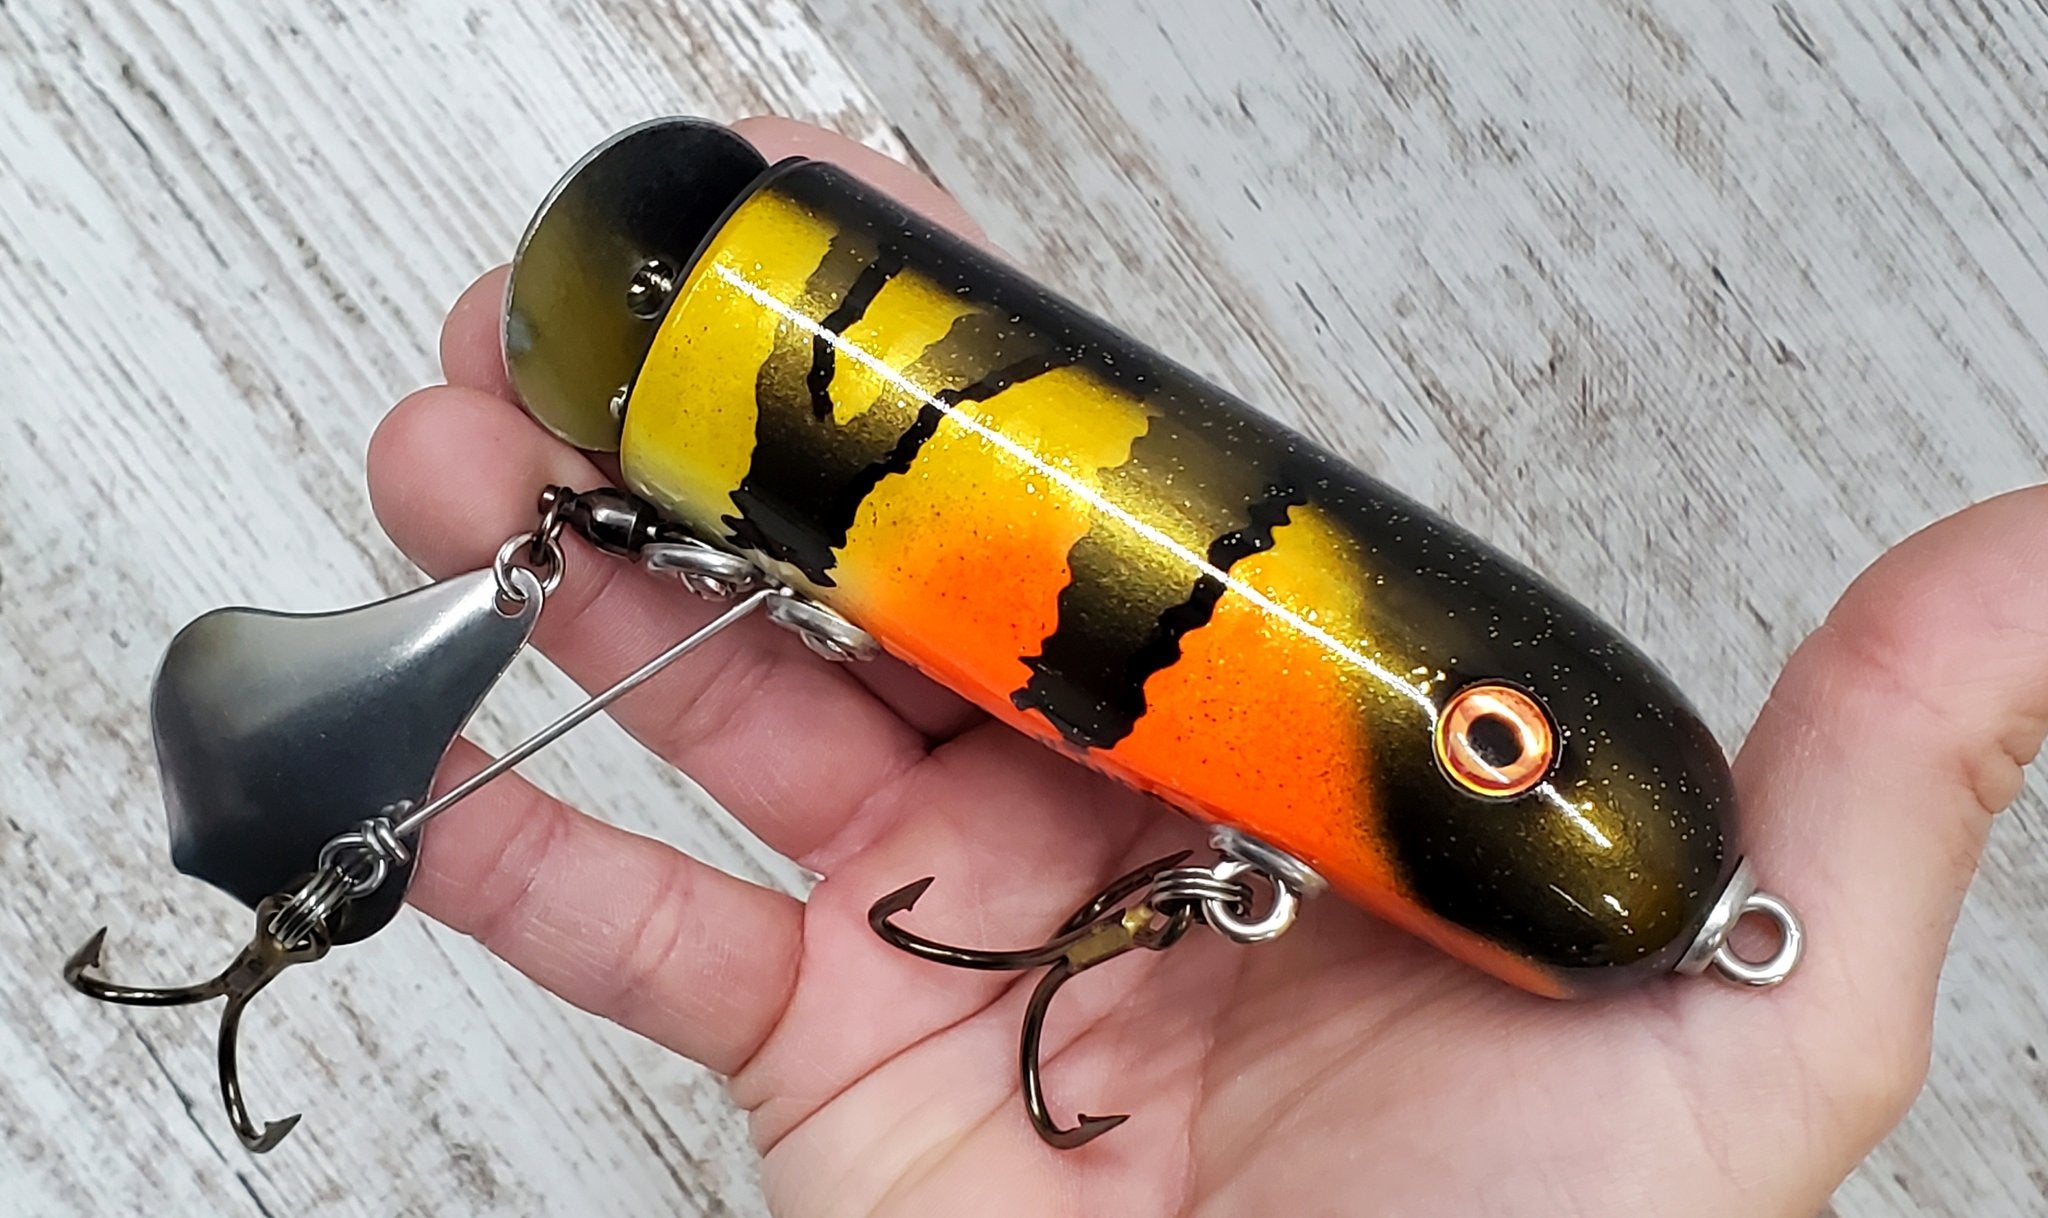 Making a jointed through-wire musky lure 